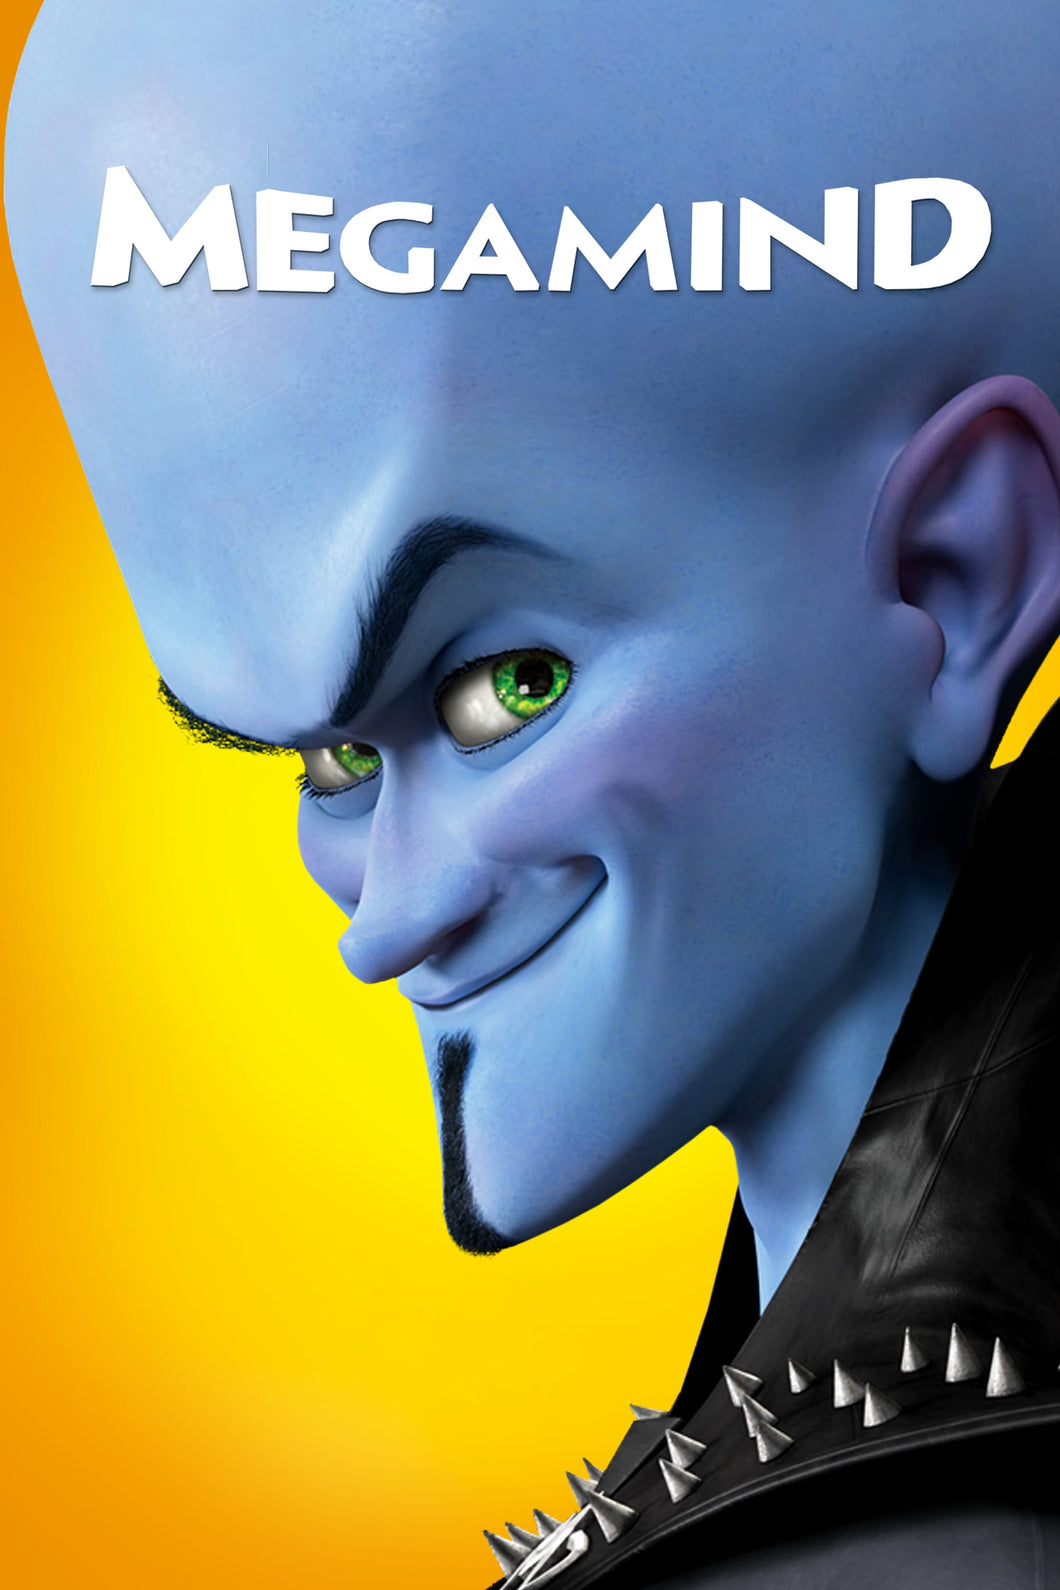 Megamind (2010) Animated Movie Poster Framed or Unframed Glossy Poster Free UK Shipping!!!